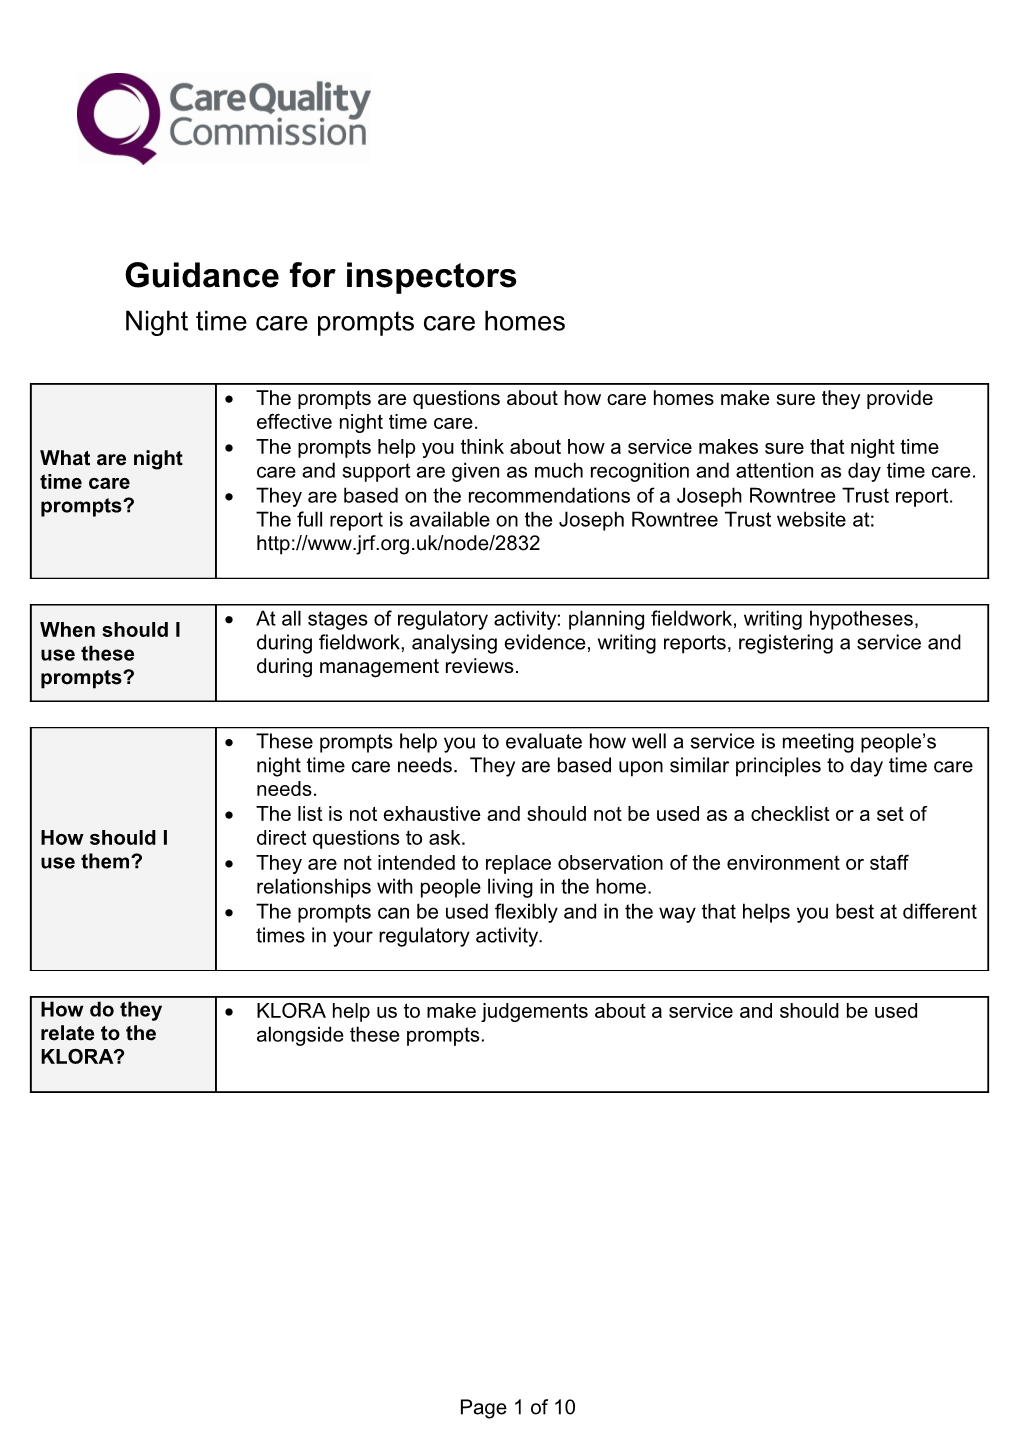 Night Time Care Prompts Care Home Guidance for Inspectors